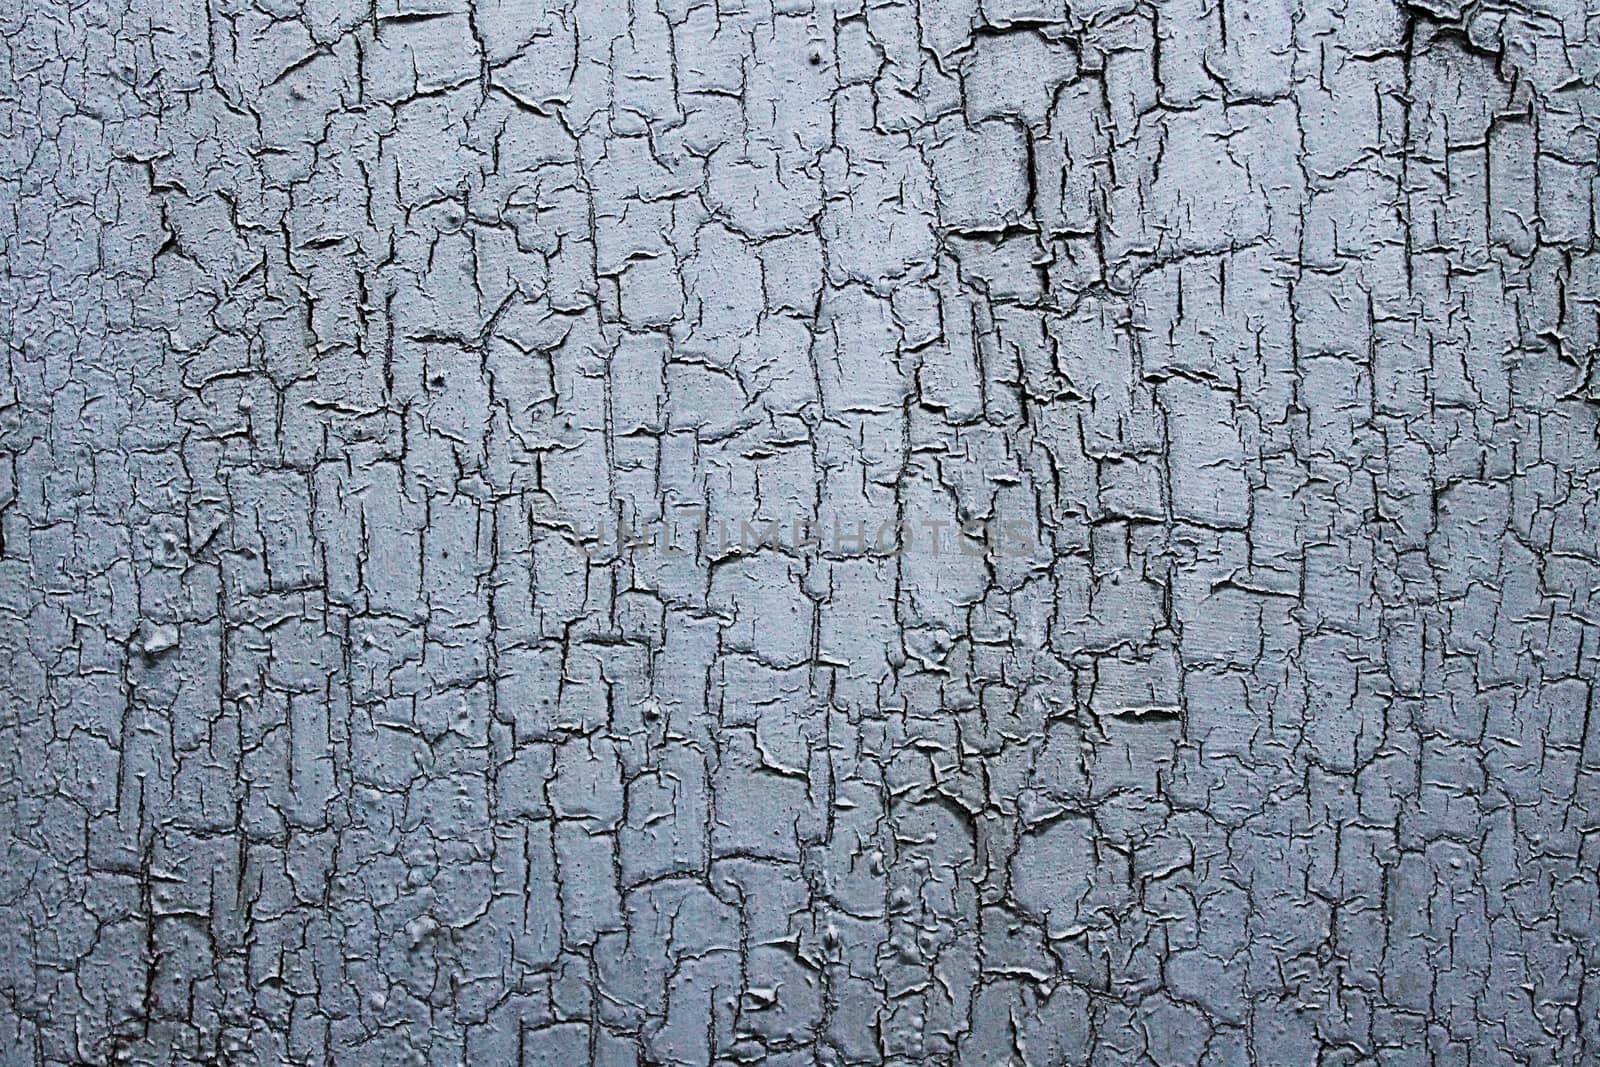 cracked surface by Ukid123